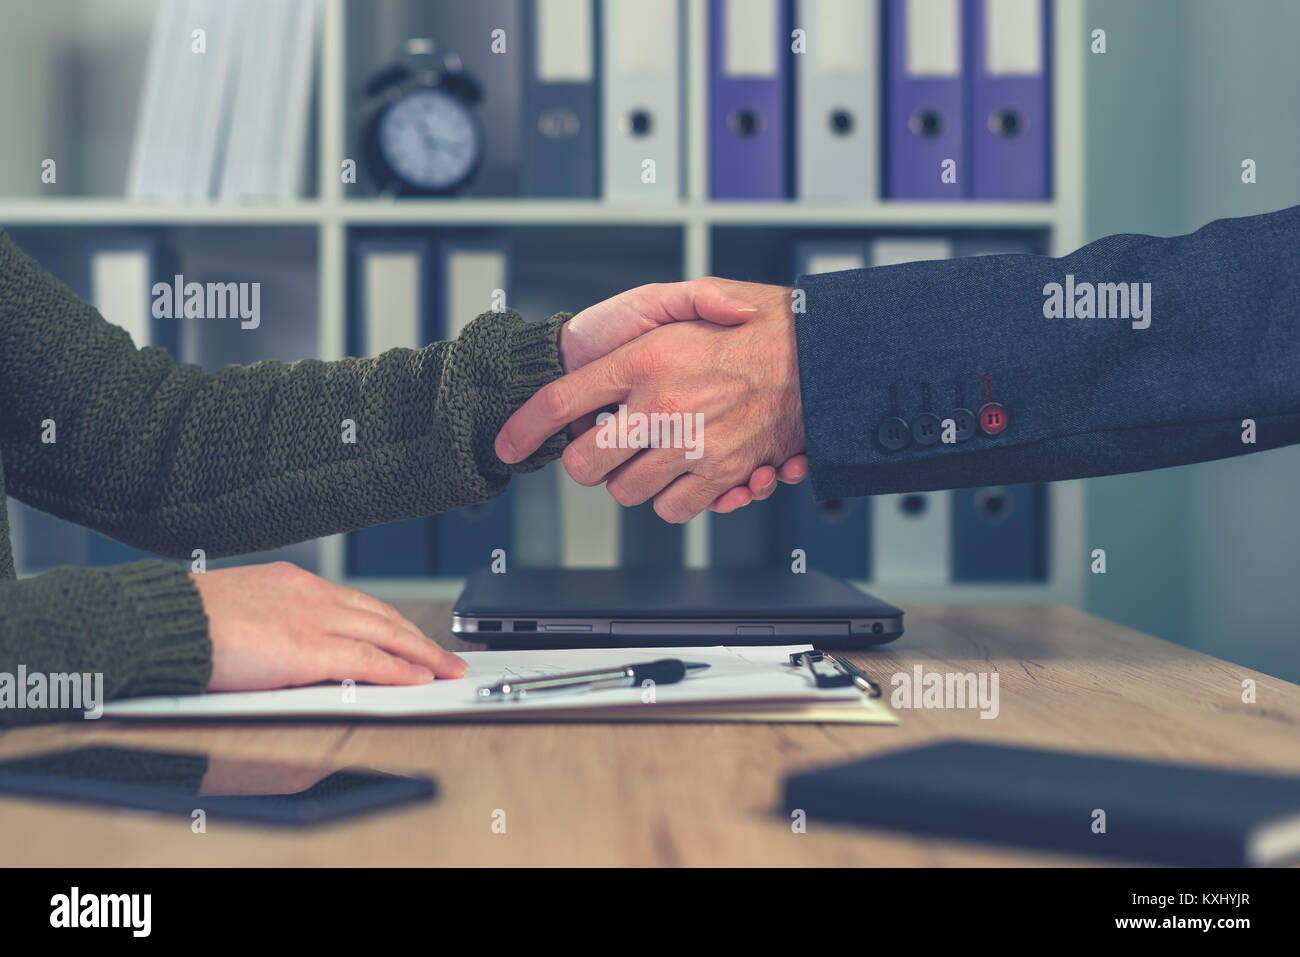 Man and woman shake hands over business agreement. Start up business female entrepreneur making handshake deal with large corporate company Stock Photo